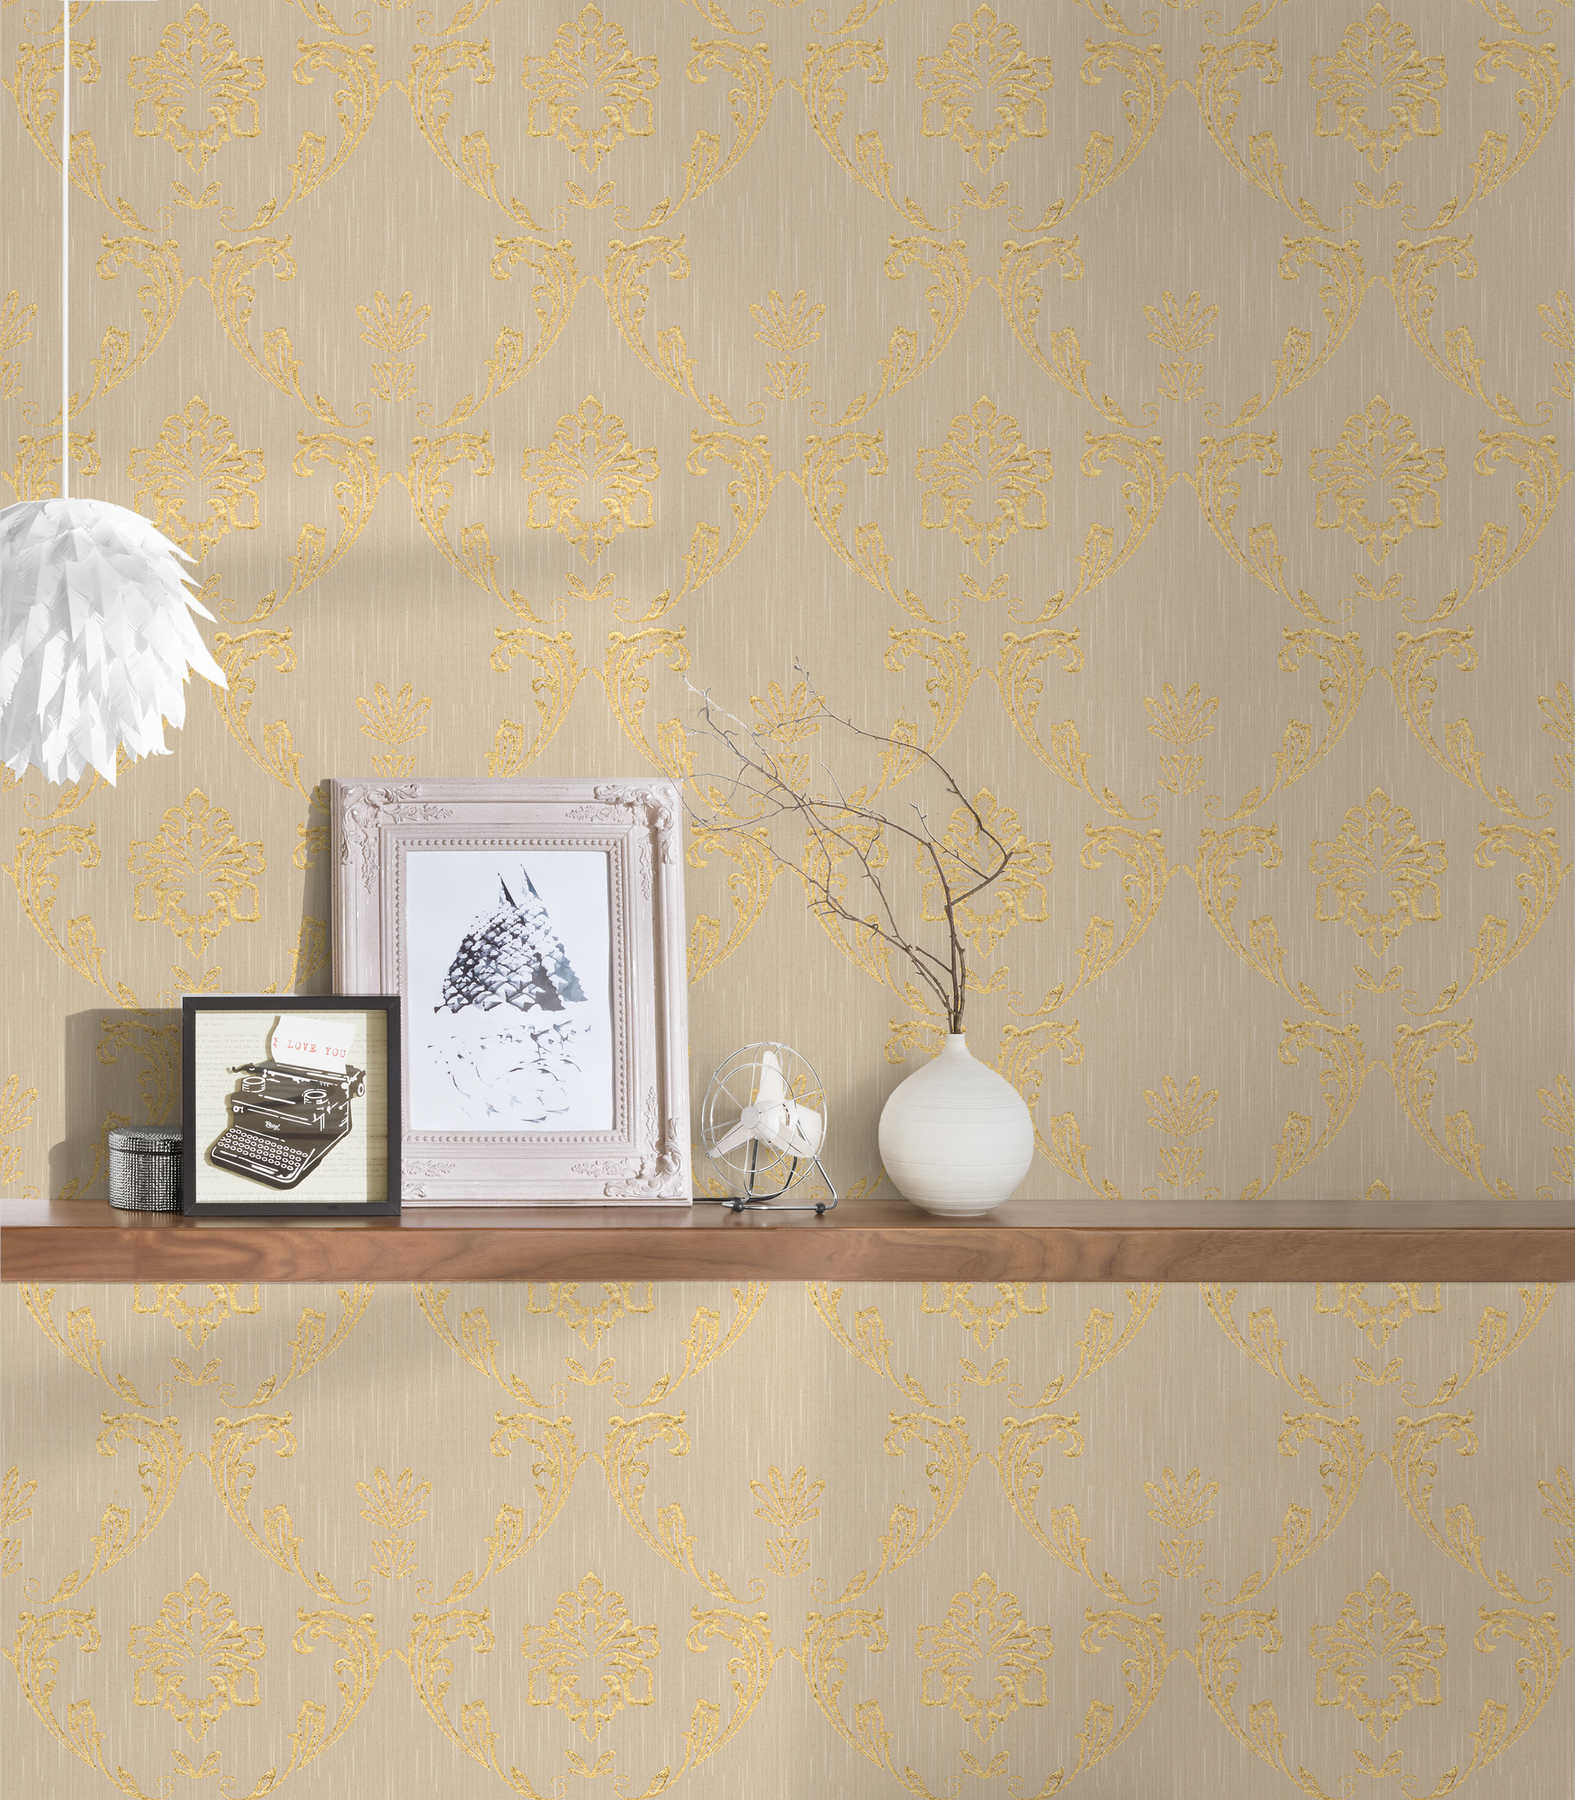             Ornamental wallpaper with floral elements in gold - gold, beige
        